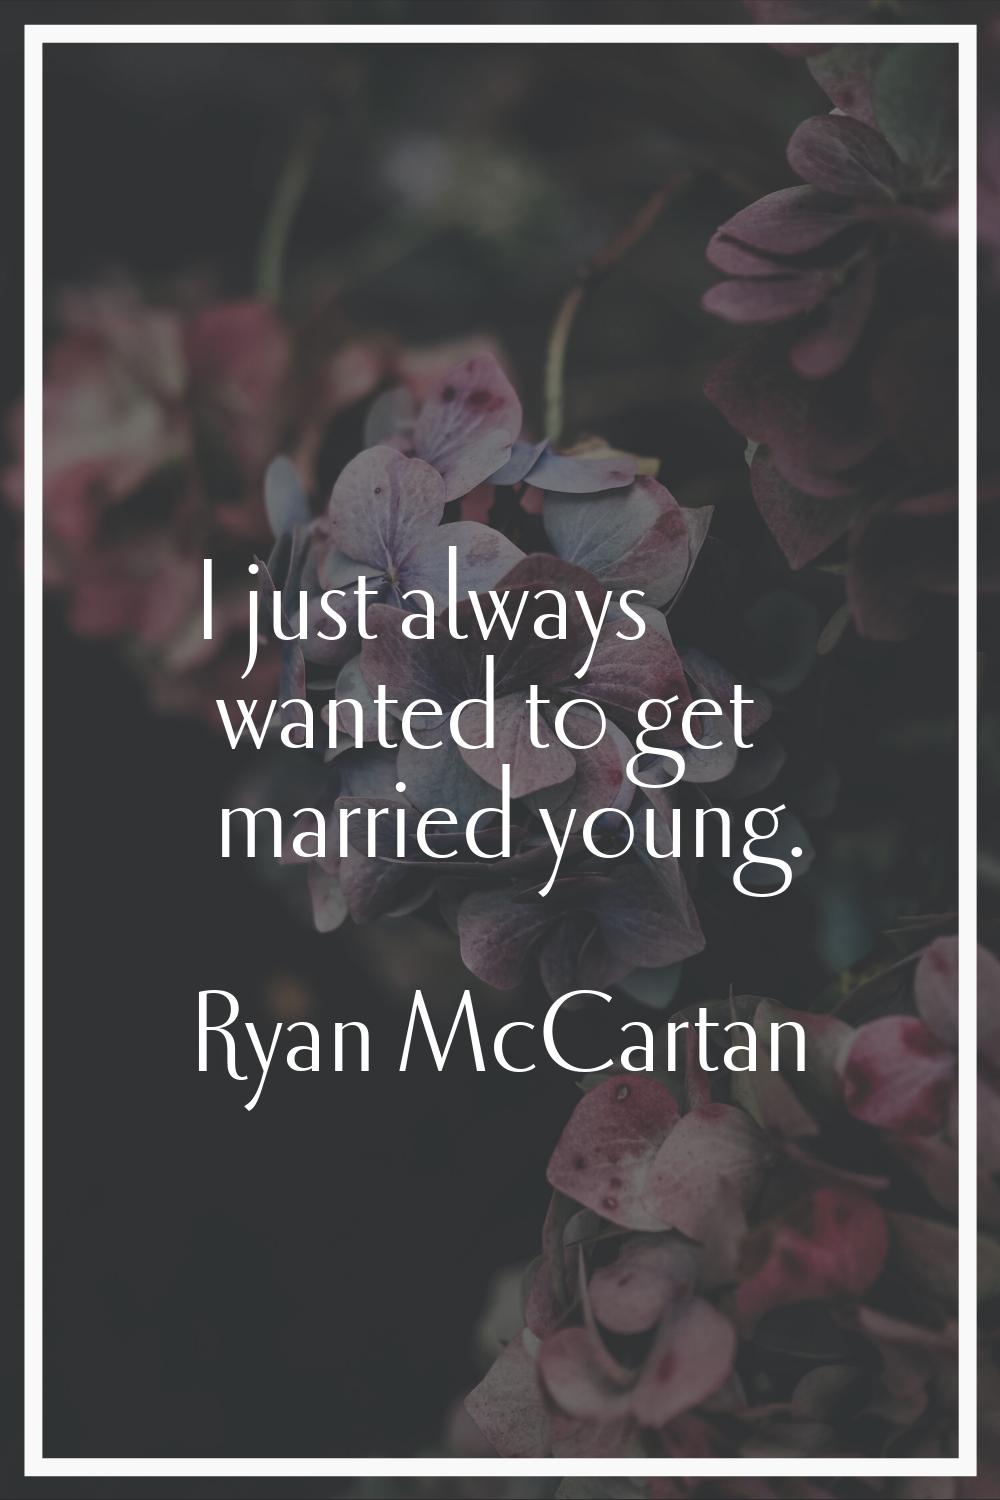 I just always wanted to get married young.